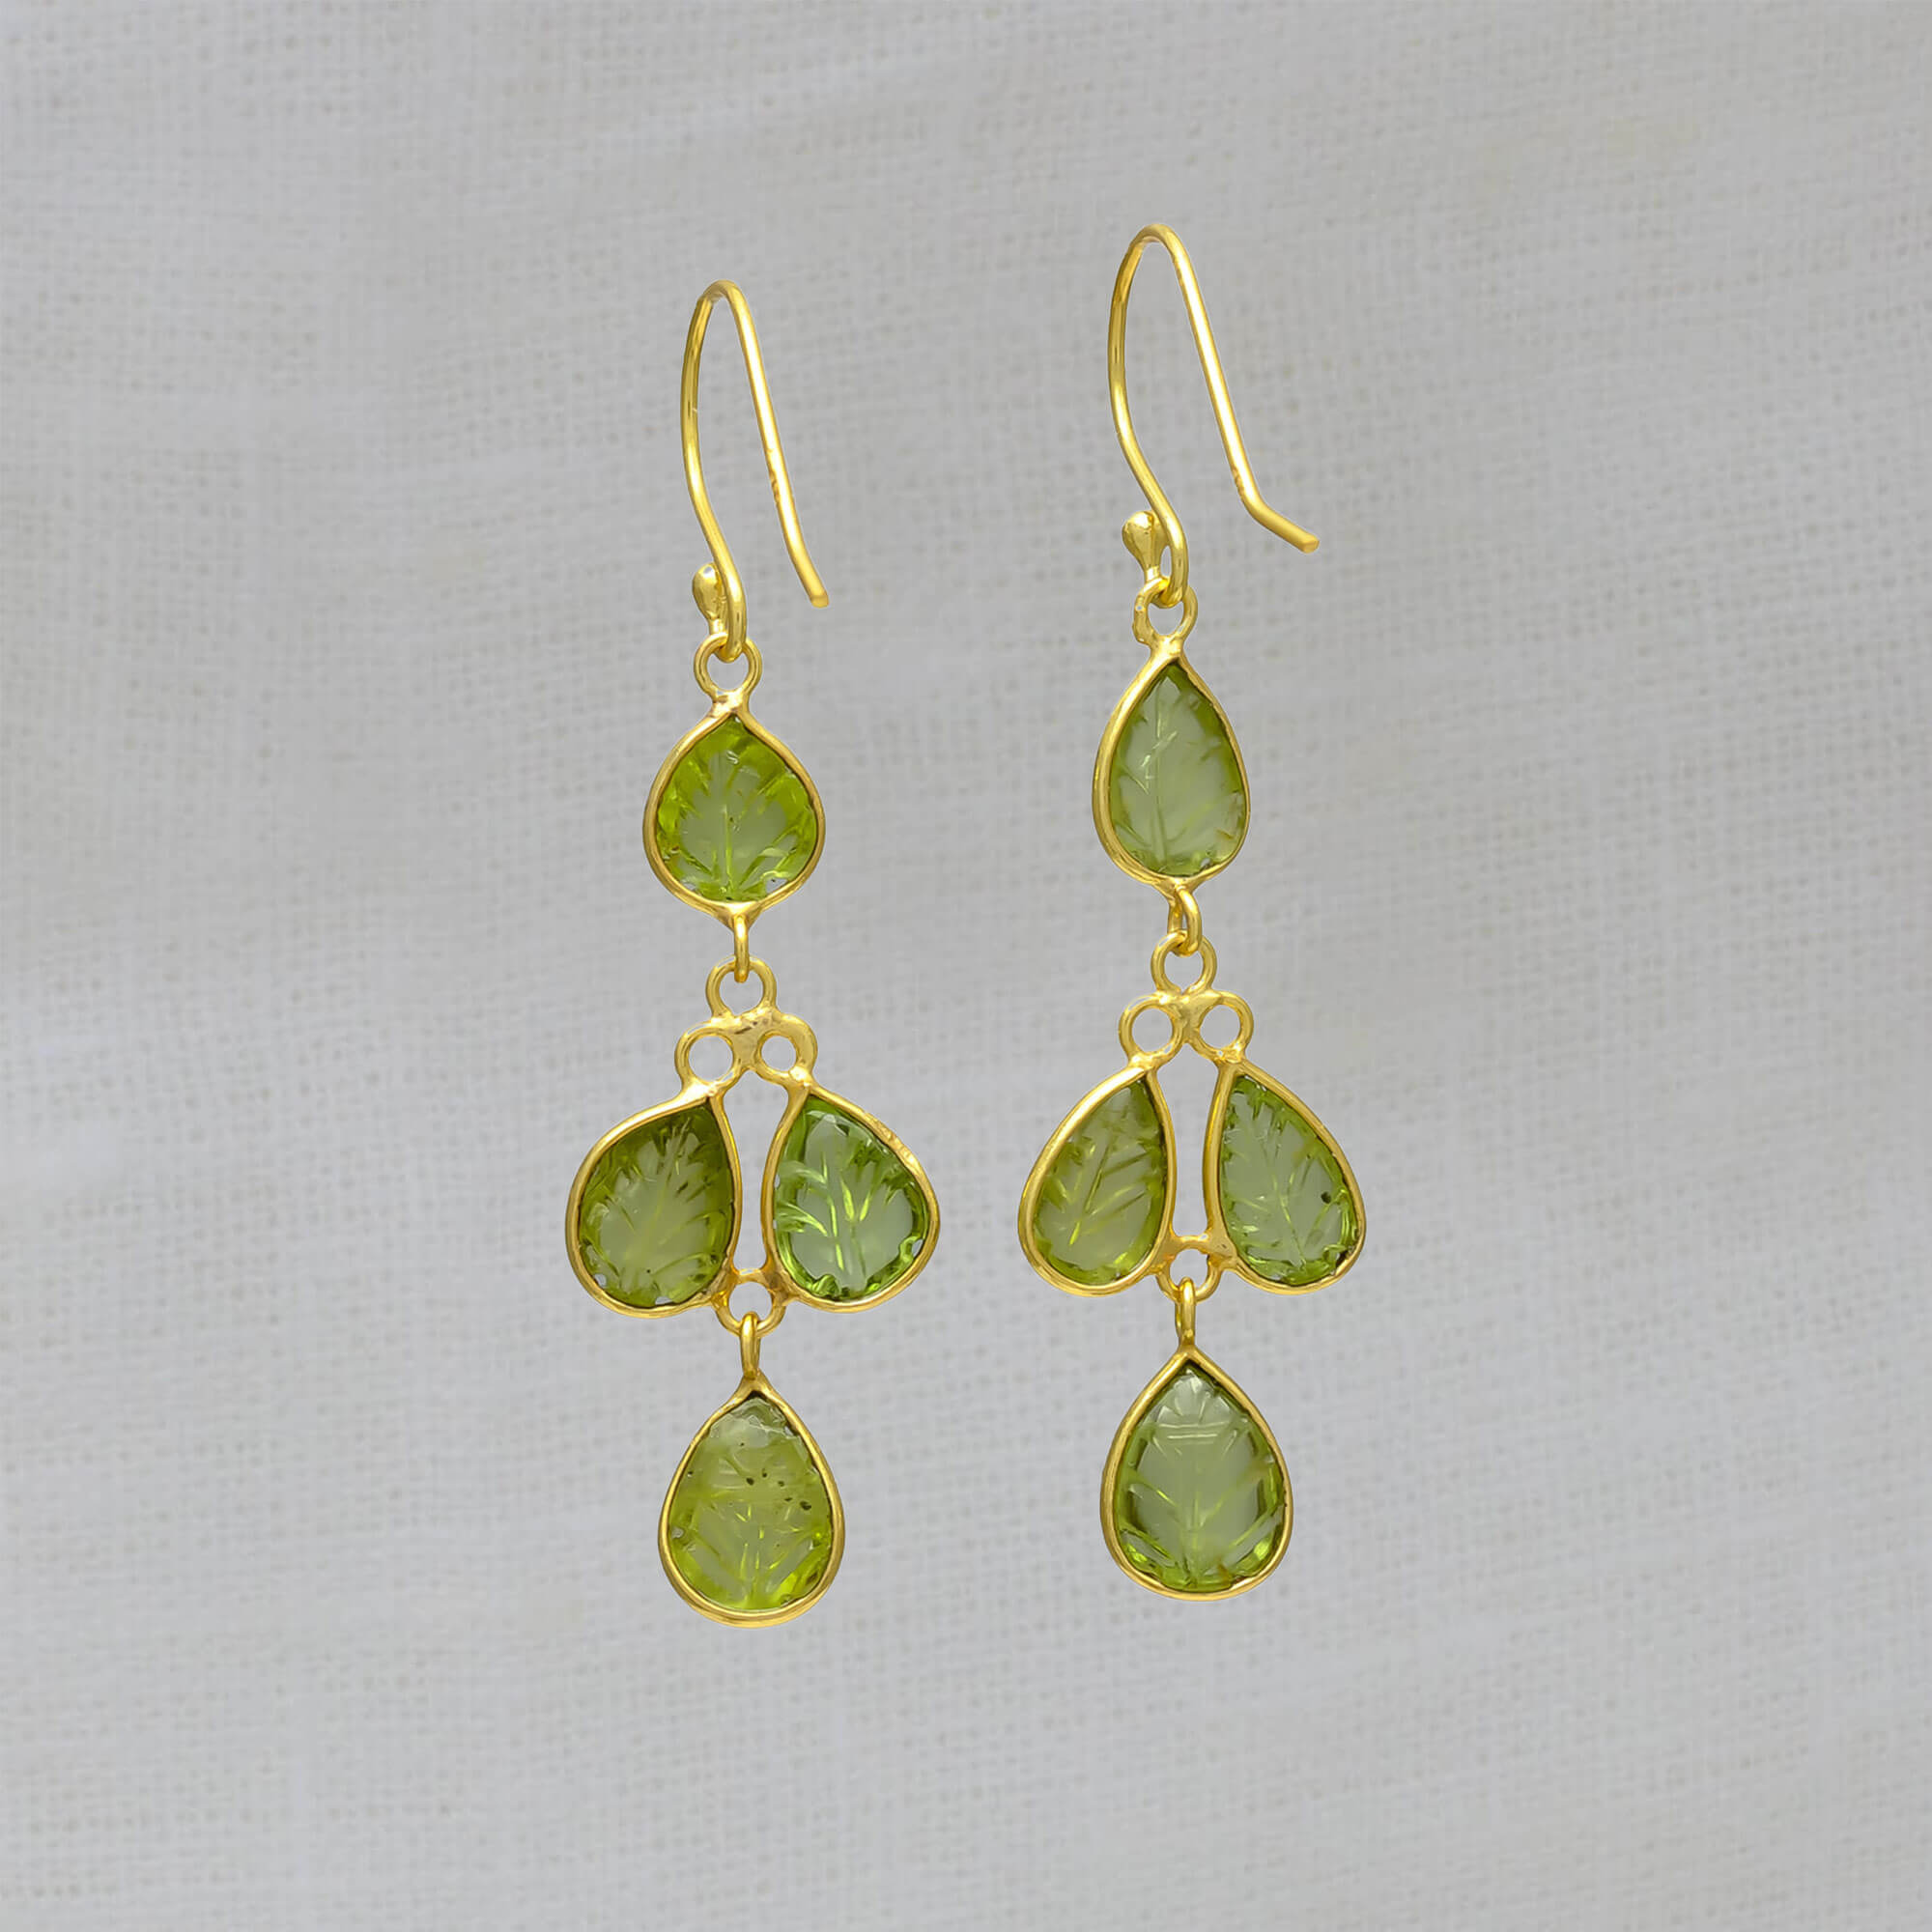 Drop earrings featuring 4 small leaf shaped carved peridot gemstones in a simple 18k gold vermeil setting, with a hook fitting